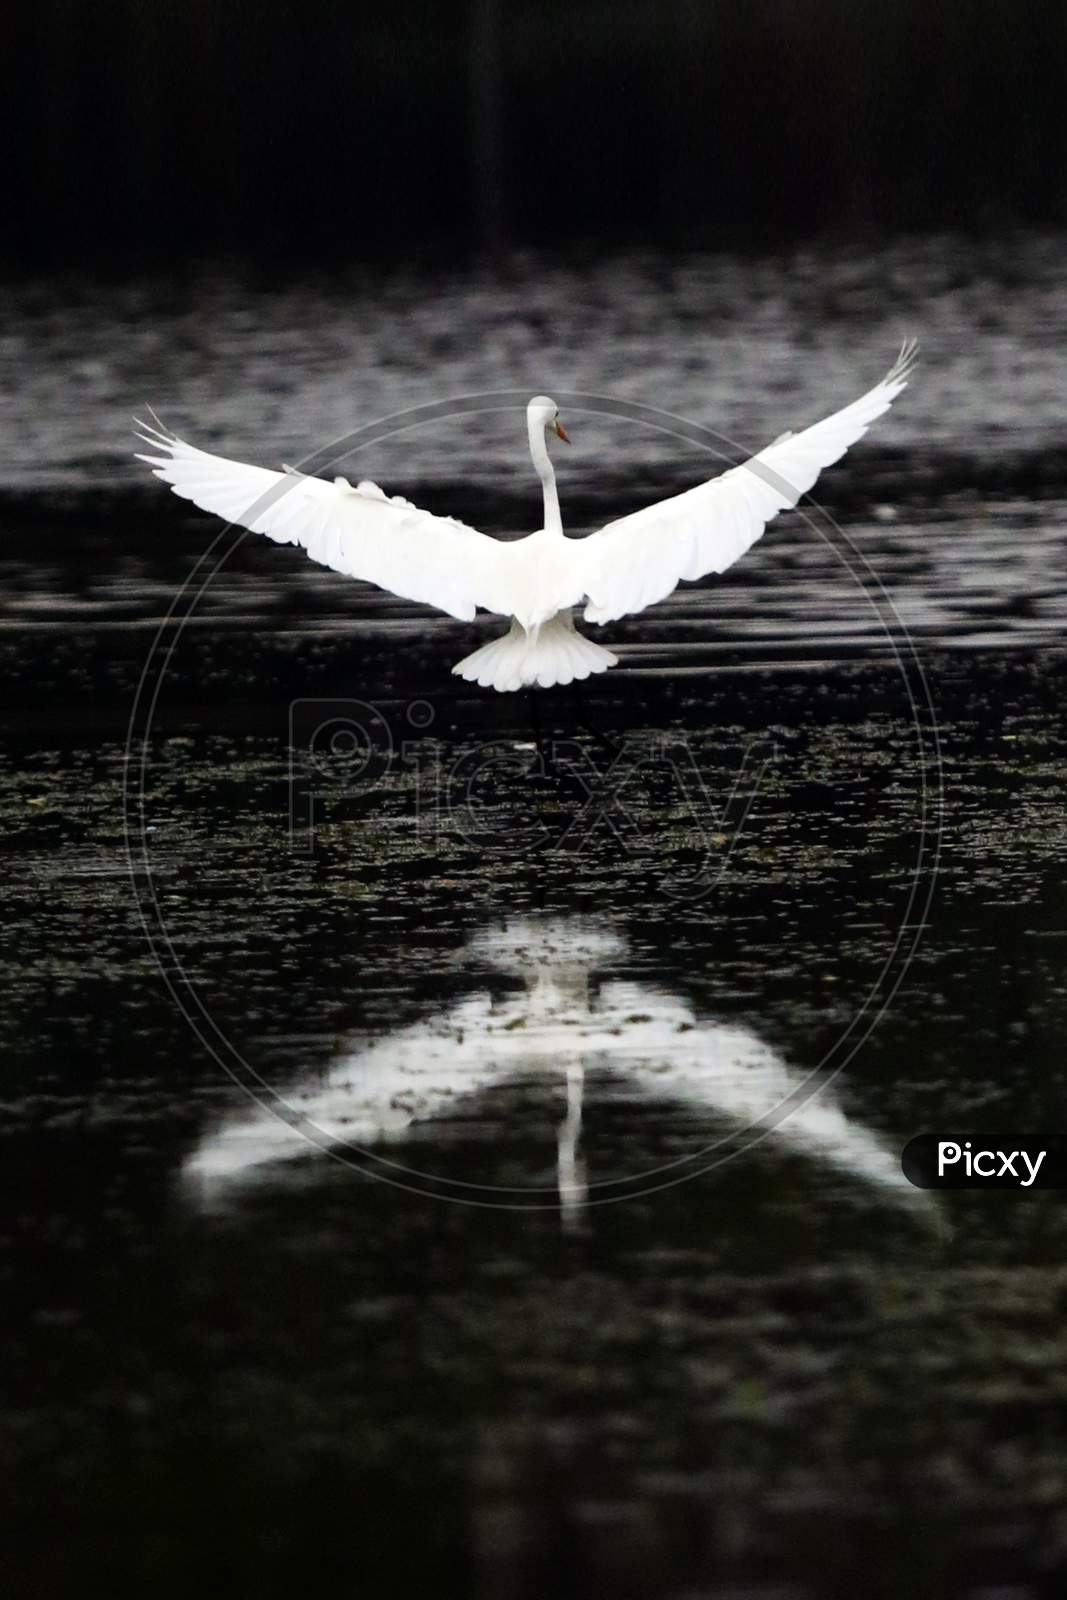 A Swan Flying Over a Lake With Reflection of Bird On Lake Water